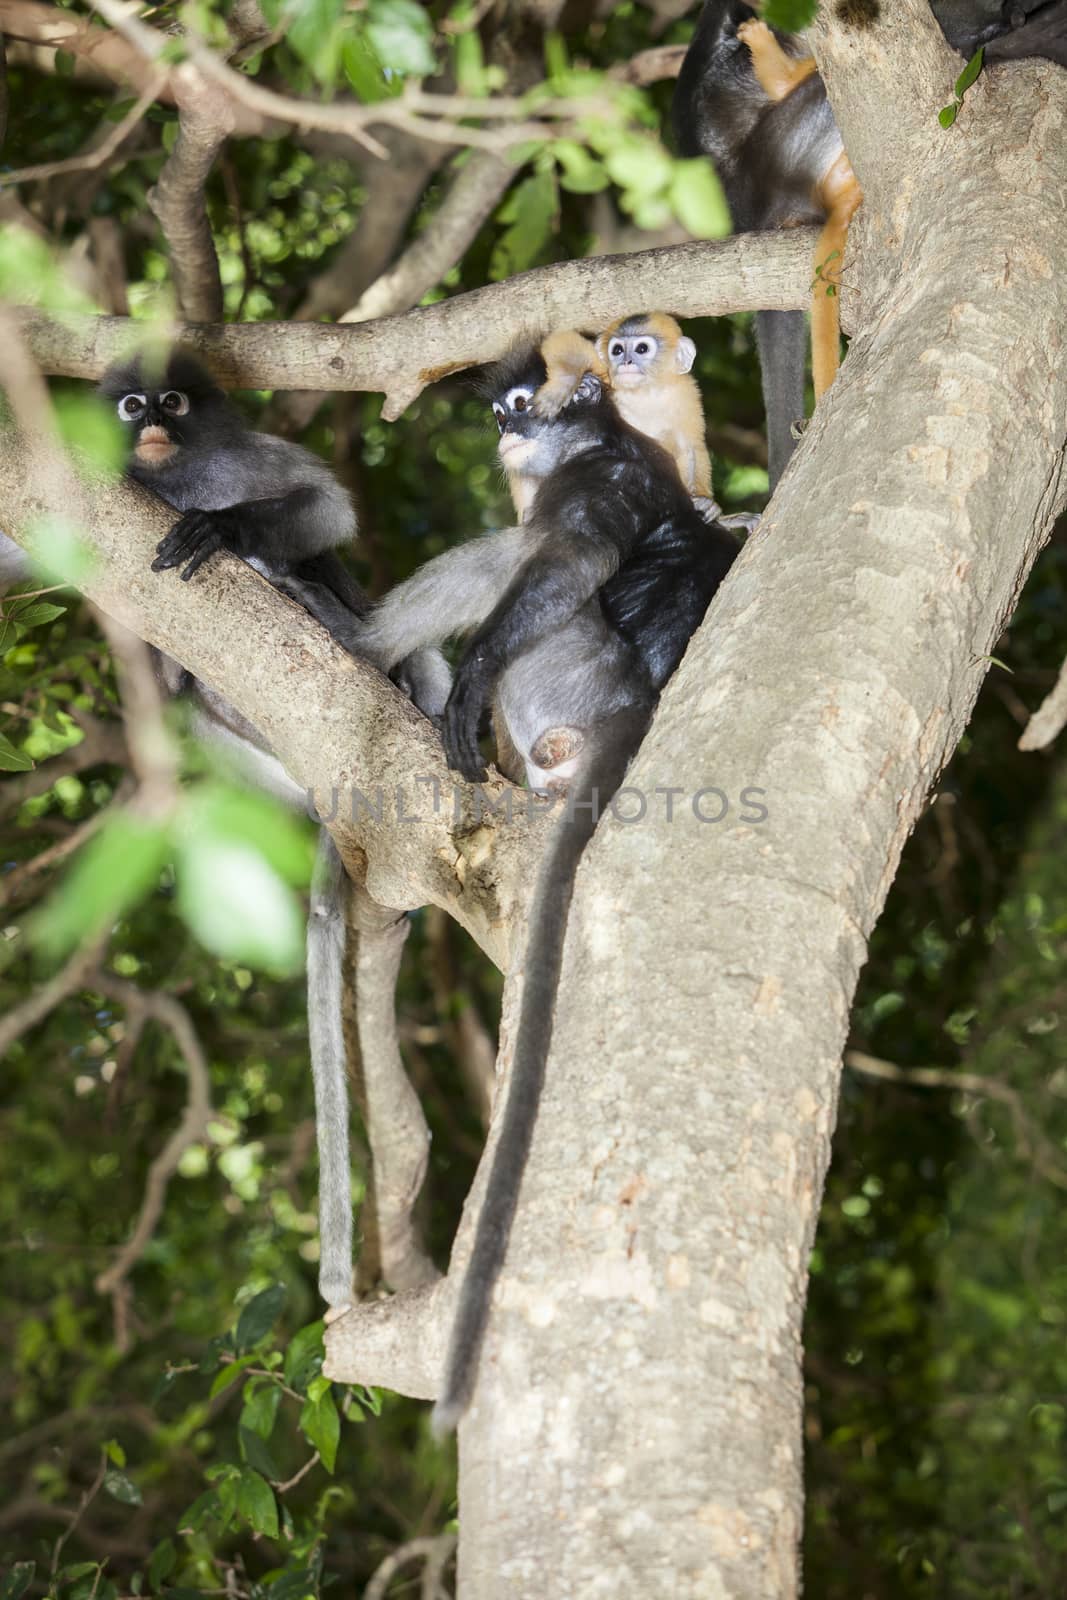 The dusky leaf monkey, spectacled langur, or spectacled leaf mon by jee1999